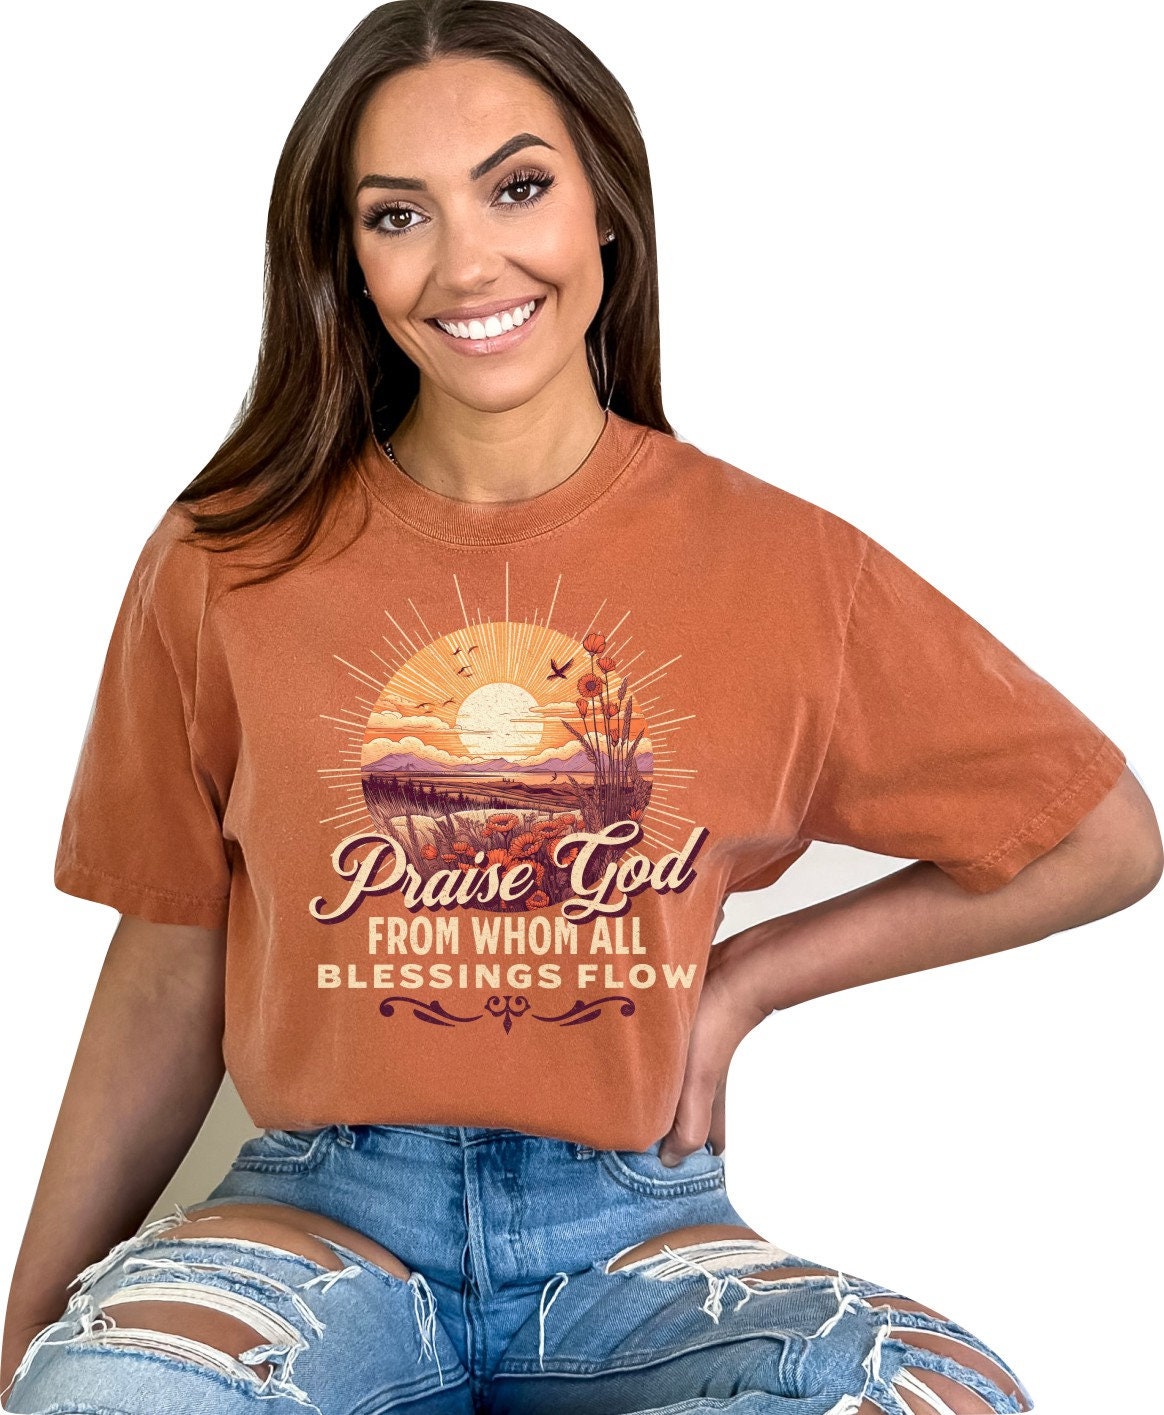 Christian Shirts Religious Tshirt Christian T Shirts Boho Christian Shirt Bible Verse Shirt Praise God From Whom all Blessings Flow Shirt